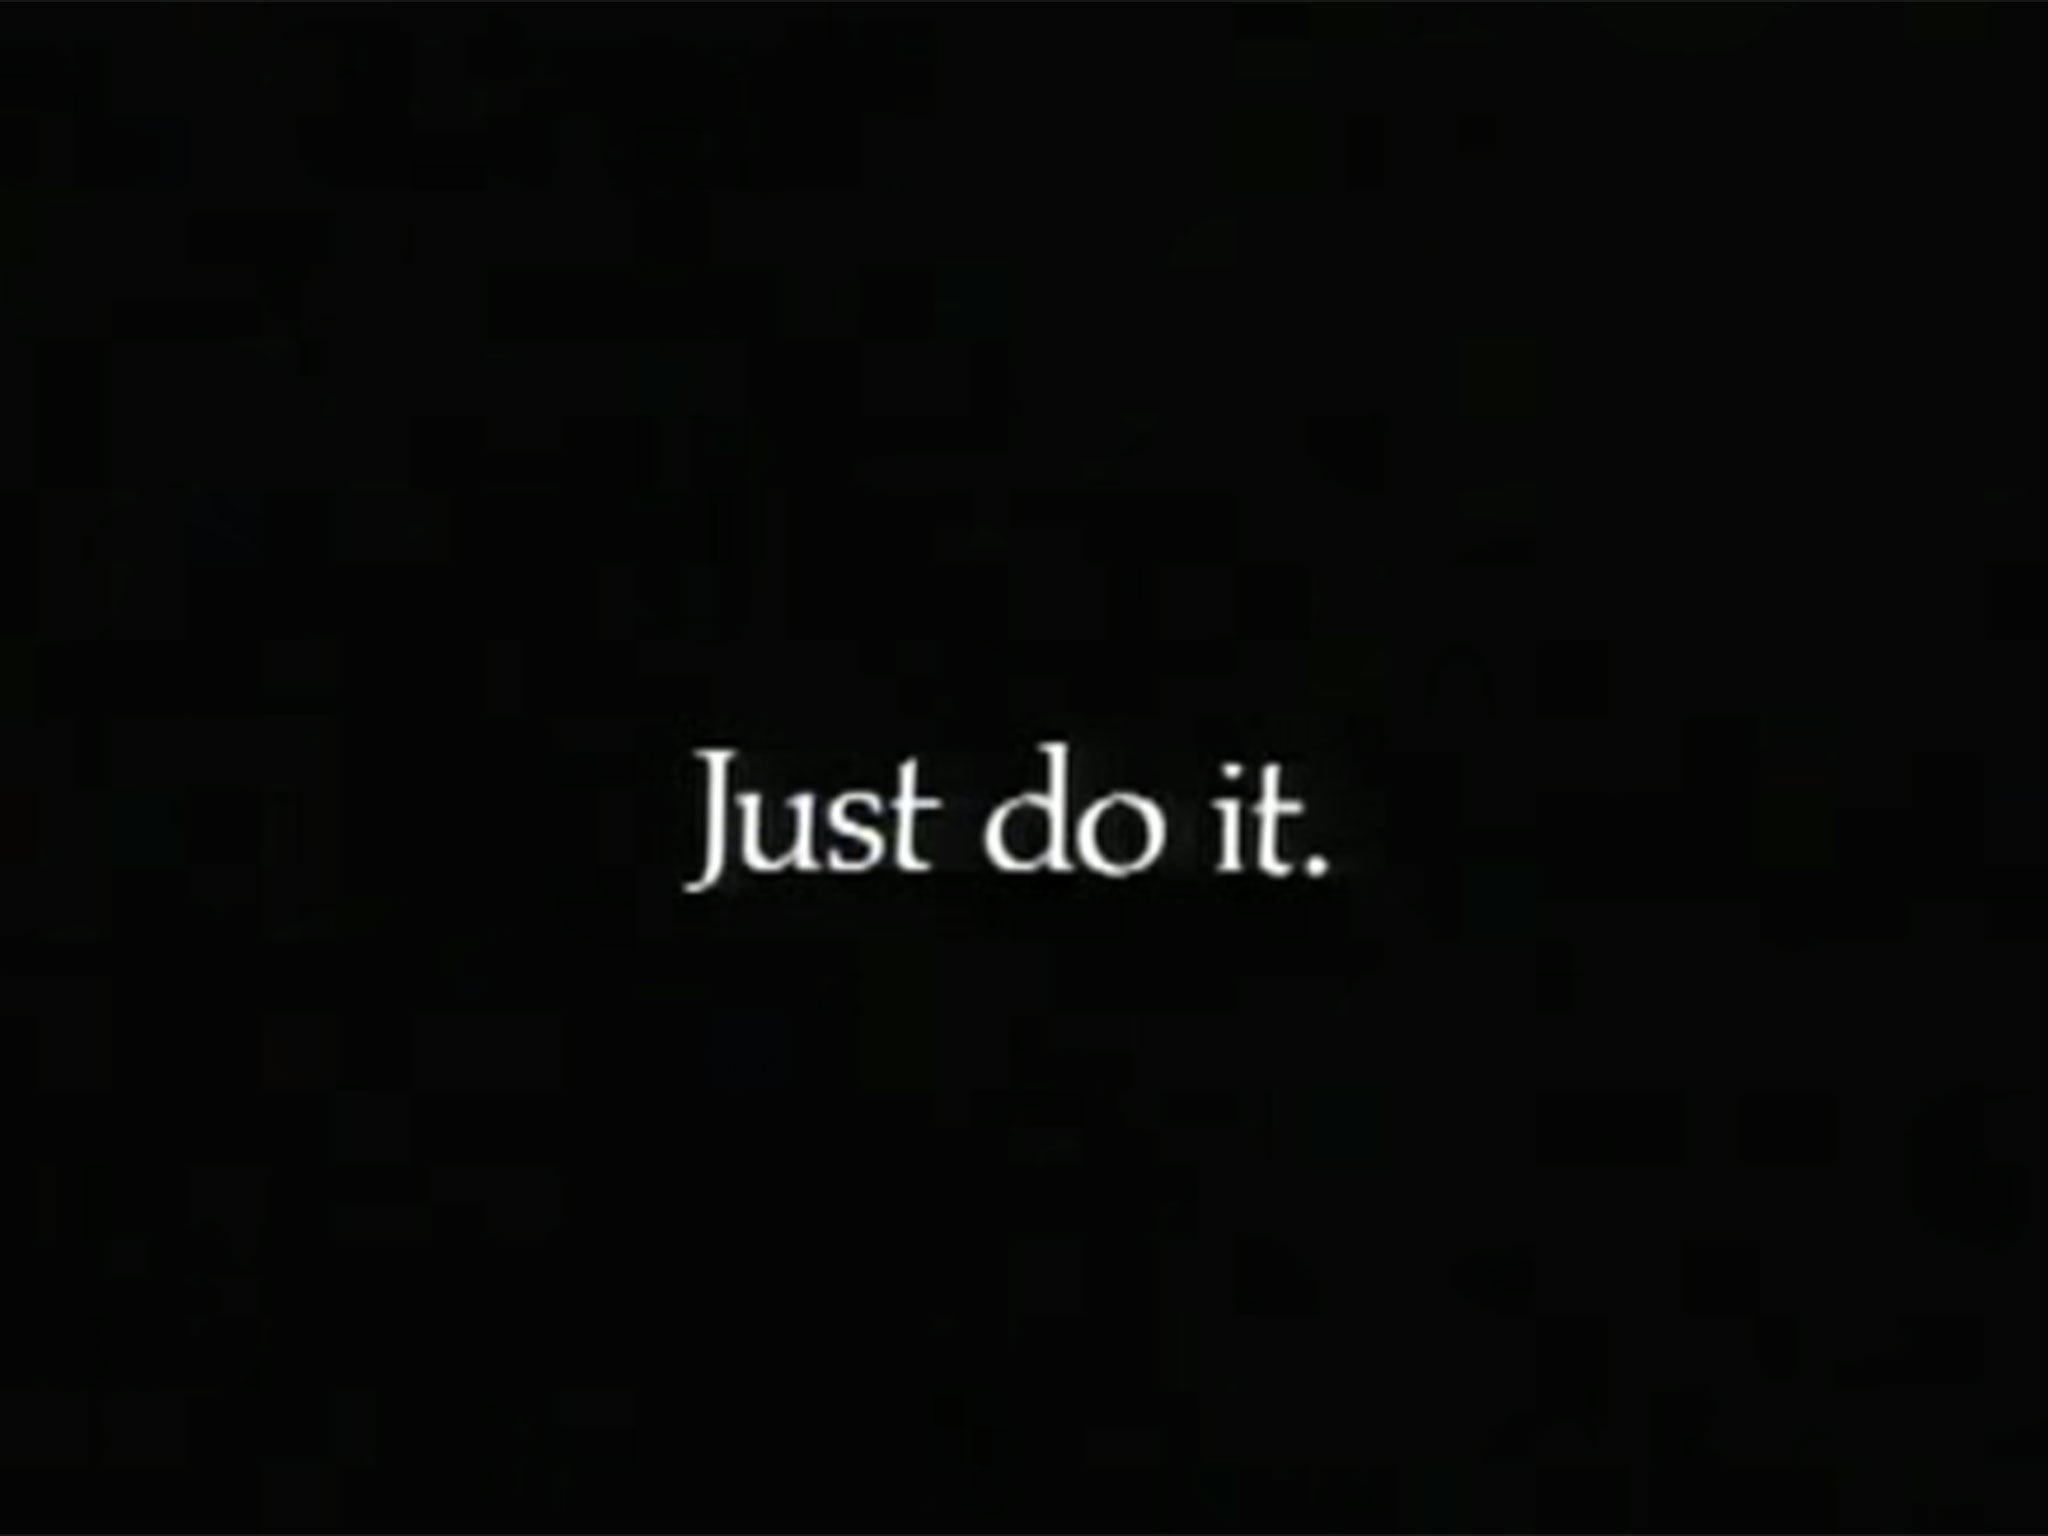 Nike's 'Just Do It' slogan was inspired 